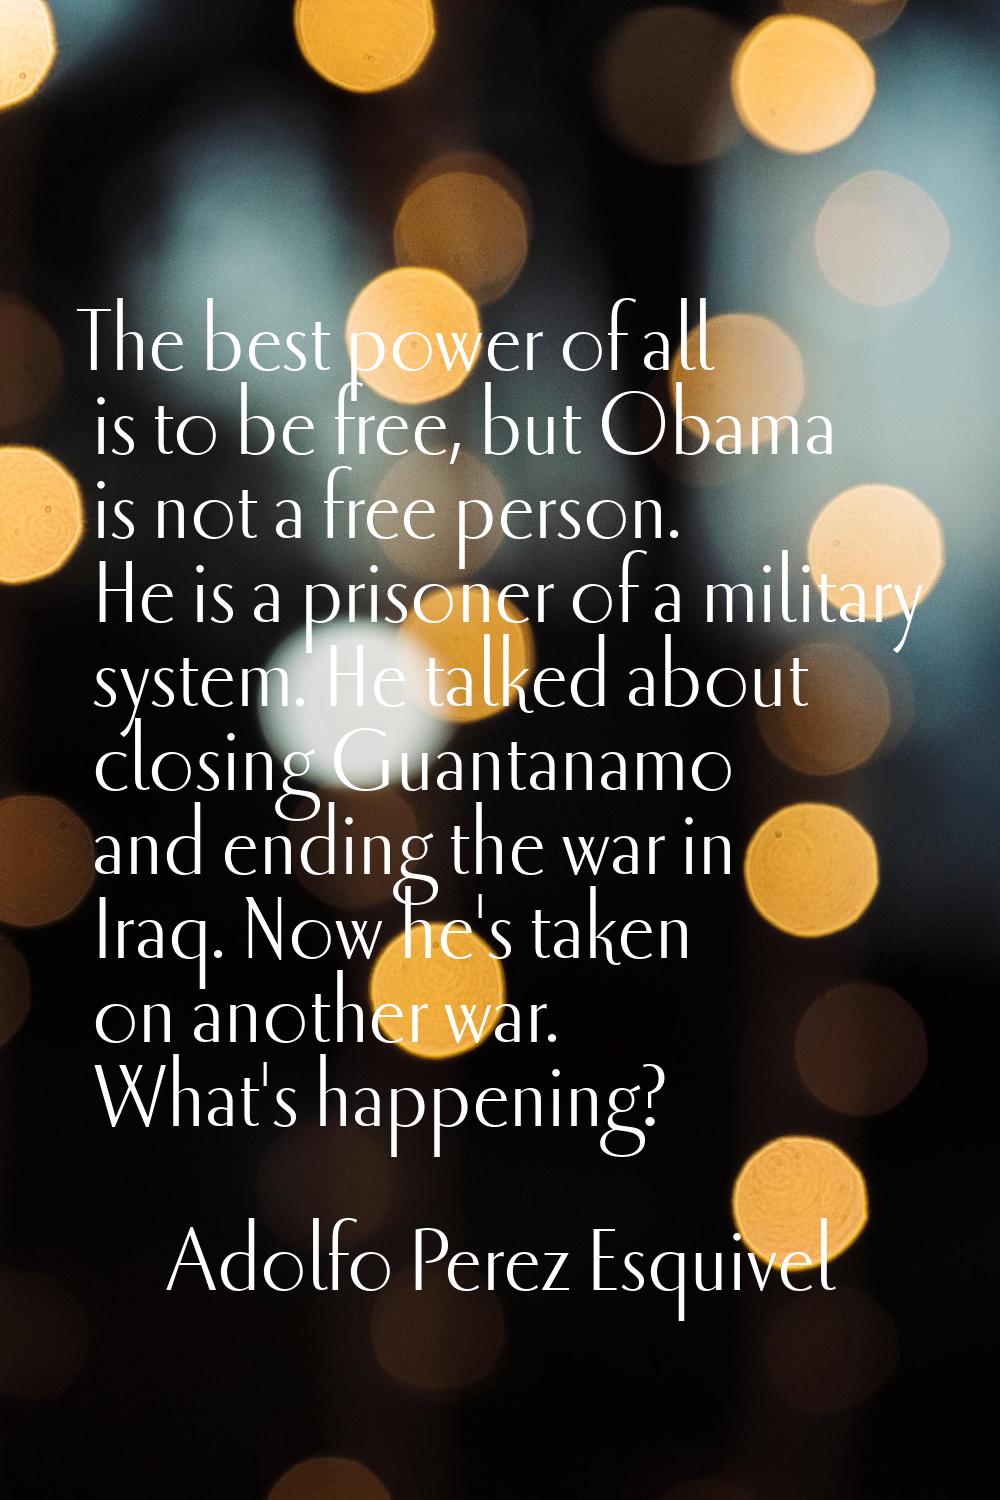 The best power of all is to be free, but Obama is not a free person. He is a prisoner of a military